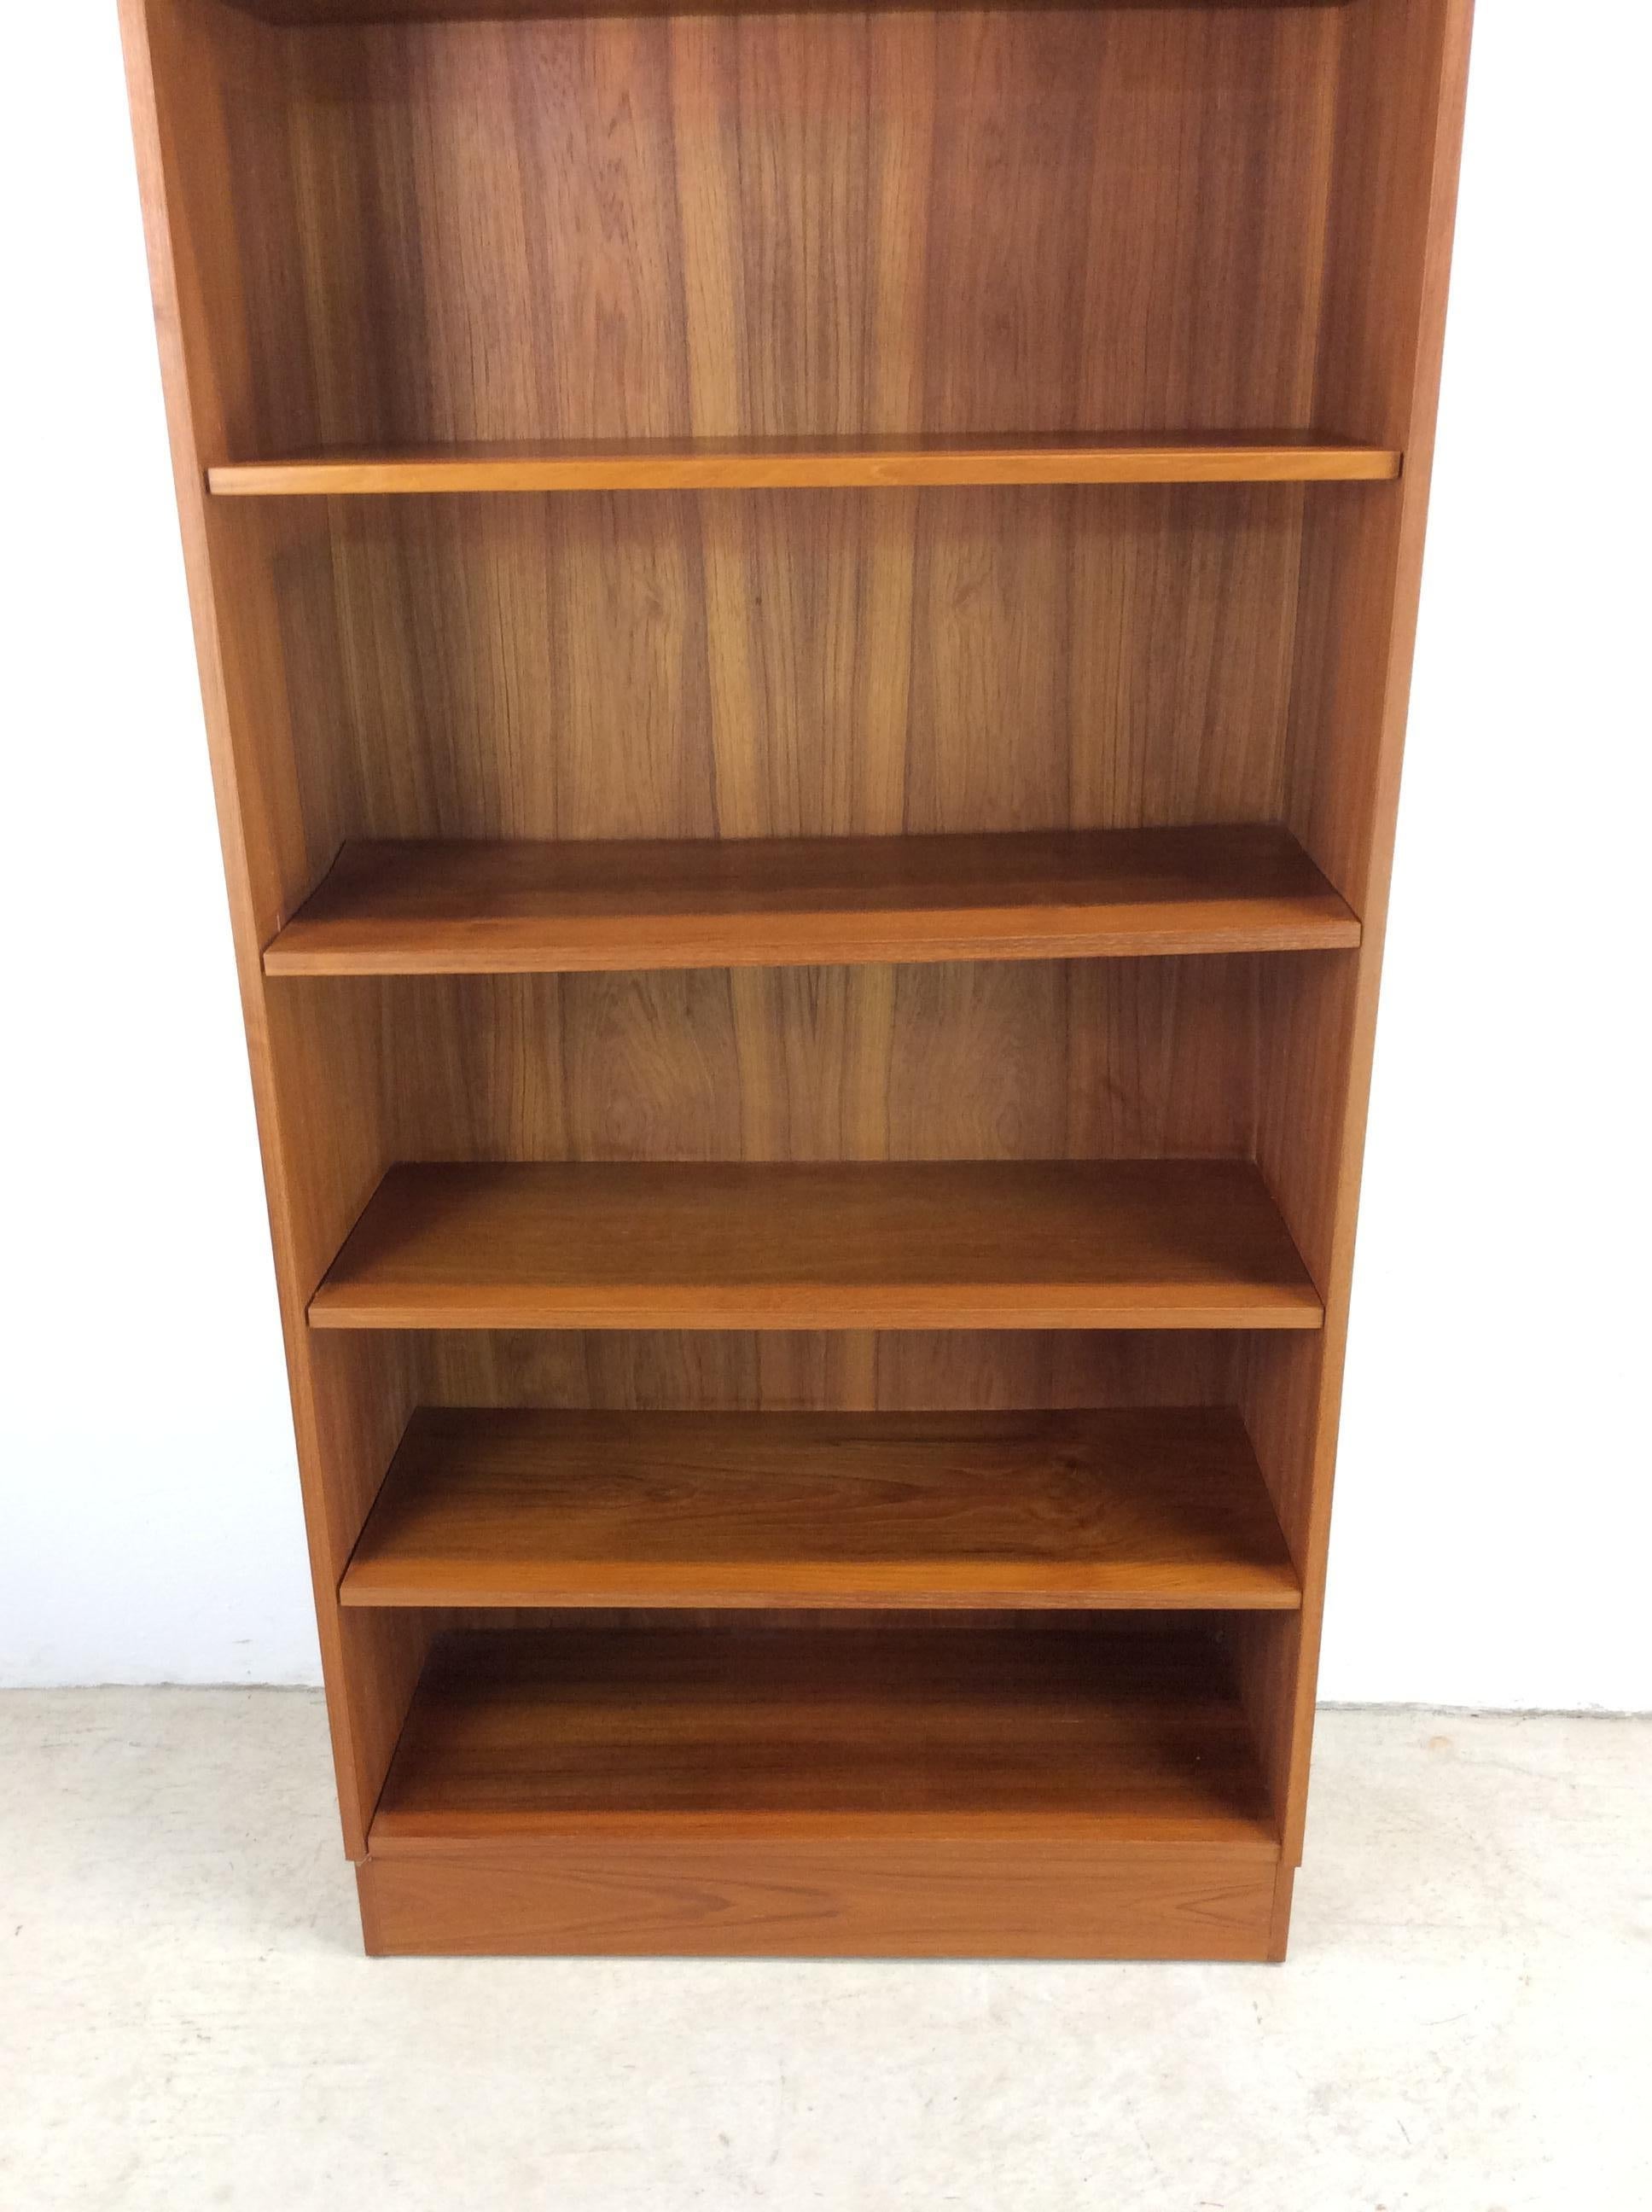 teak bookcases for sale